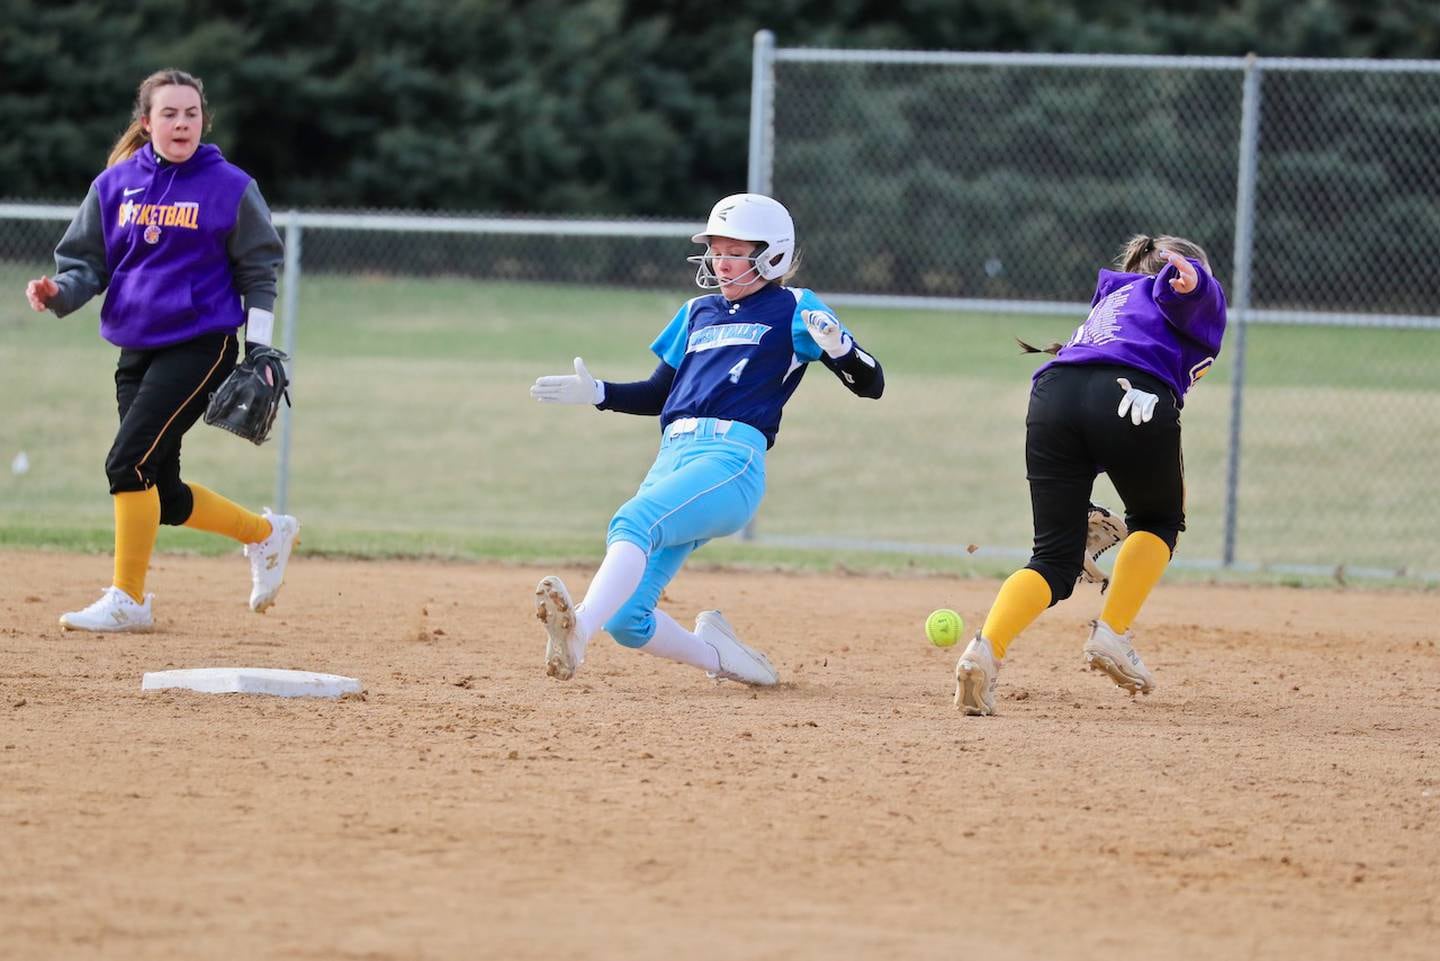 Bureau Valley's McKinley Canady slides in safely at second base as the ball eludes the Mendota fielder Monday at Manlius.